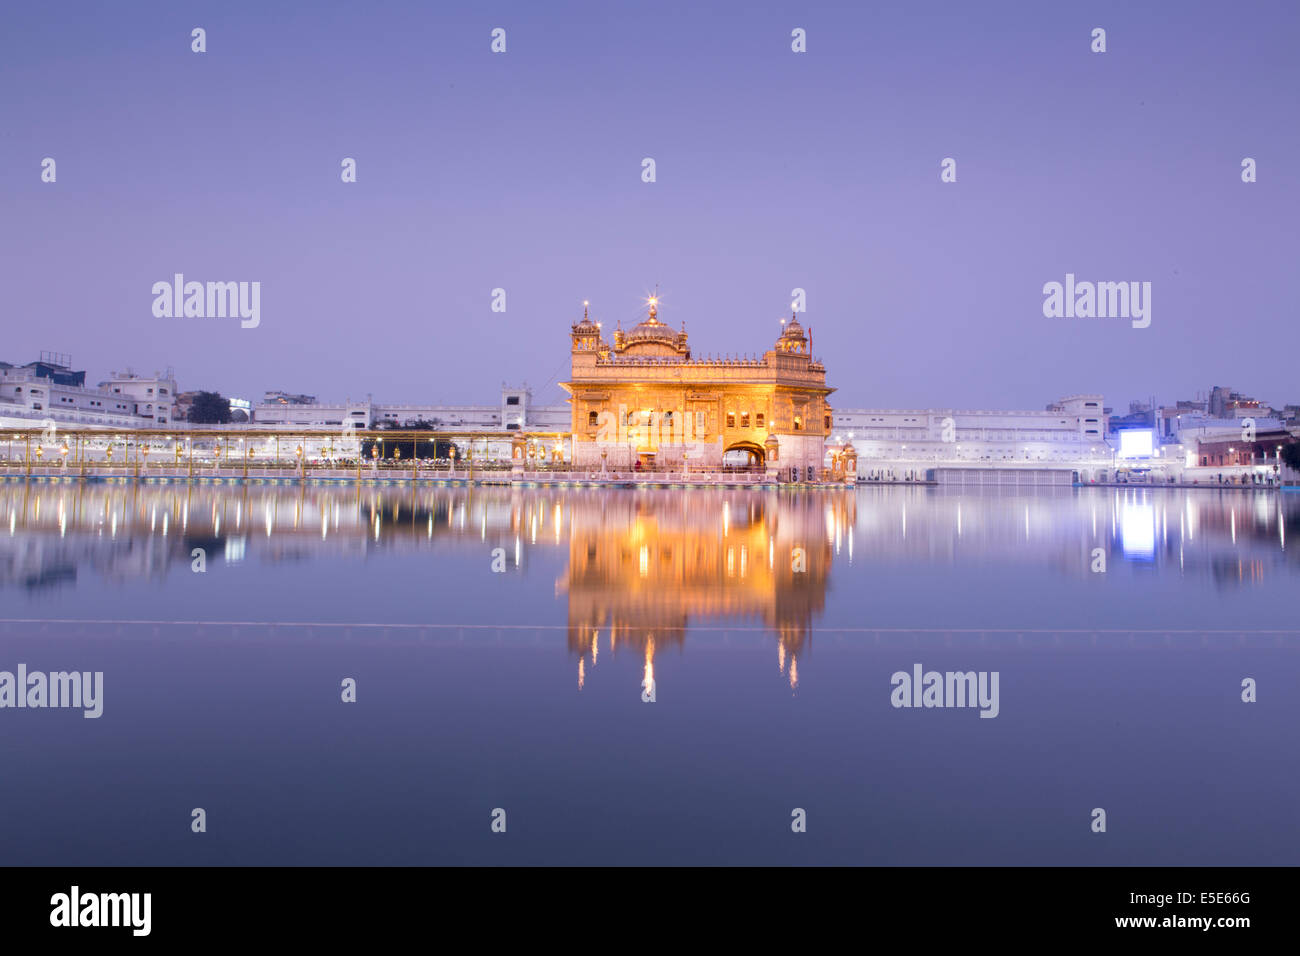 The Golden Temple in Amritsar, Punjab, India Stock Photo